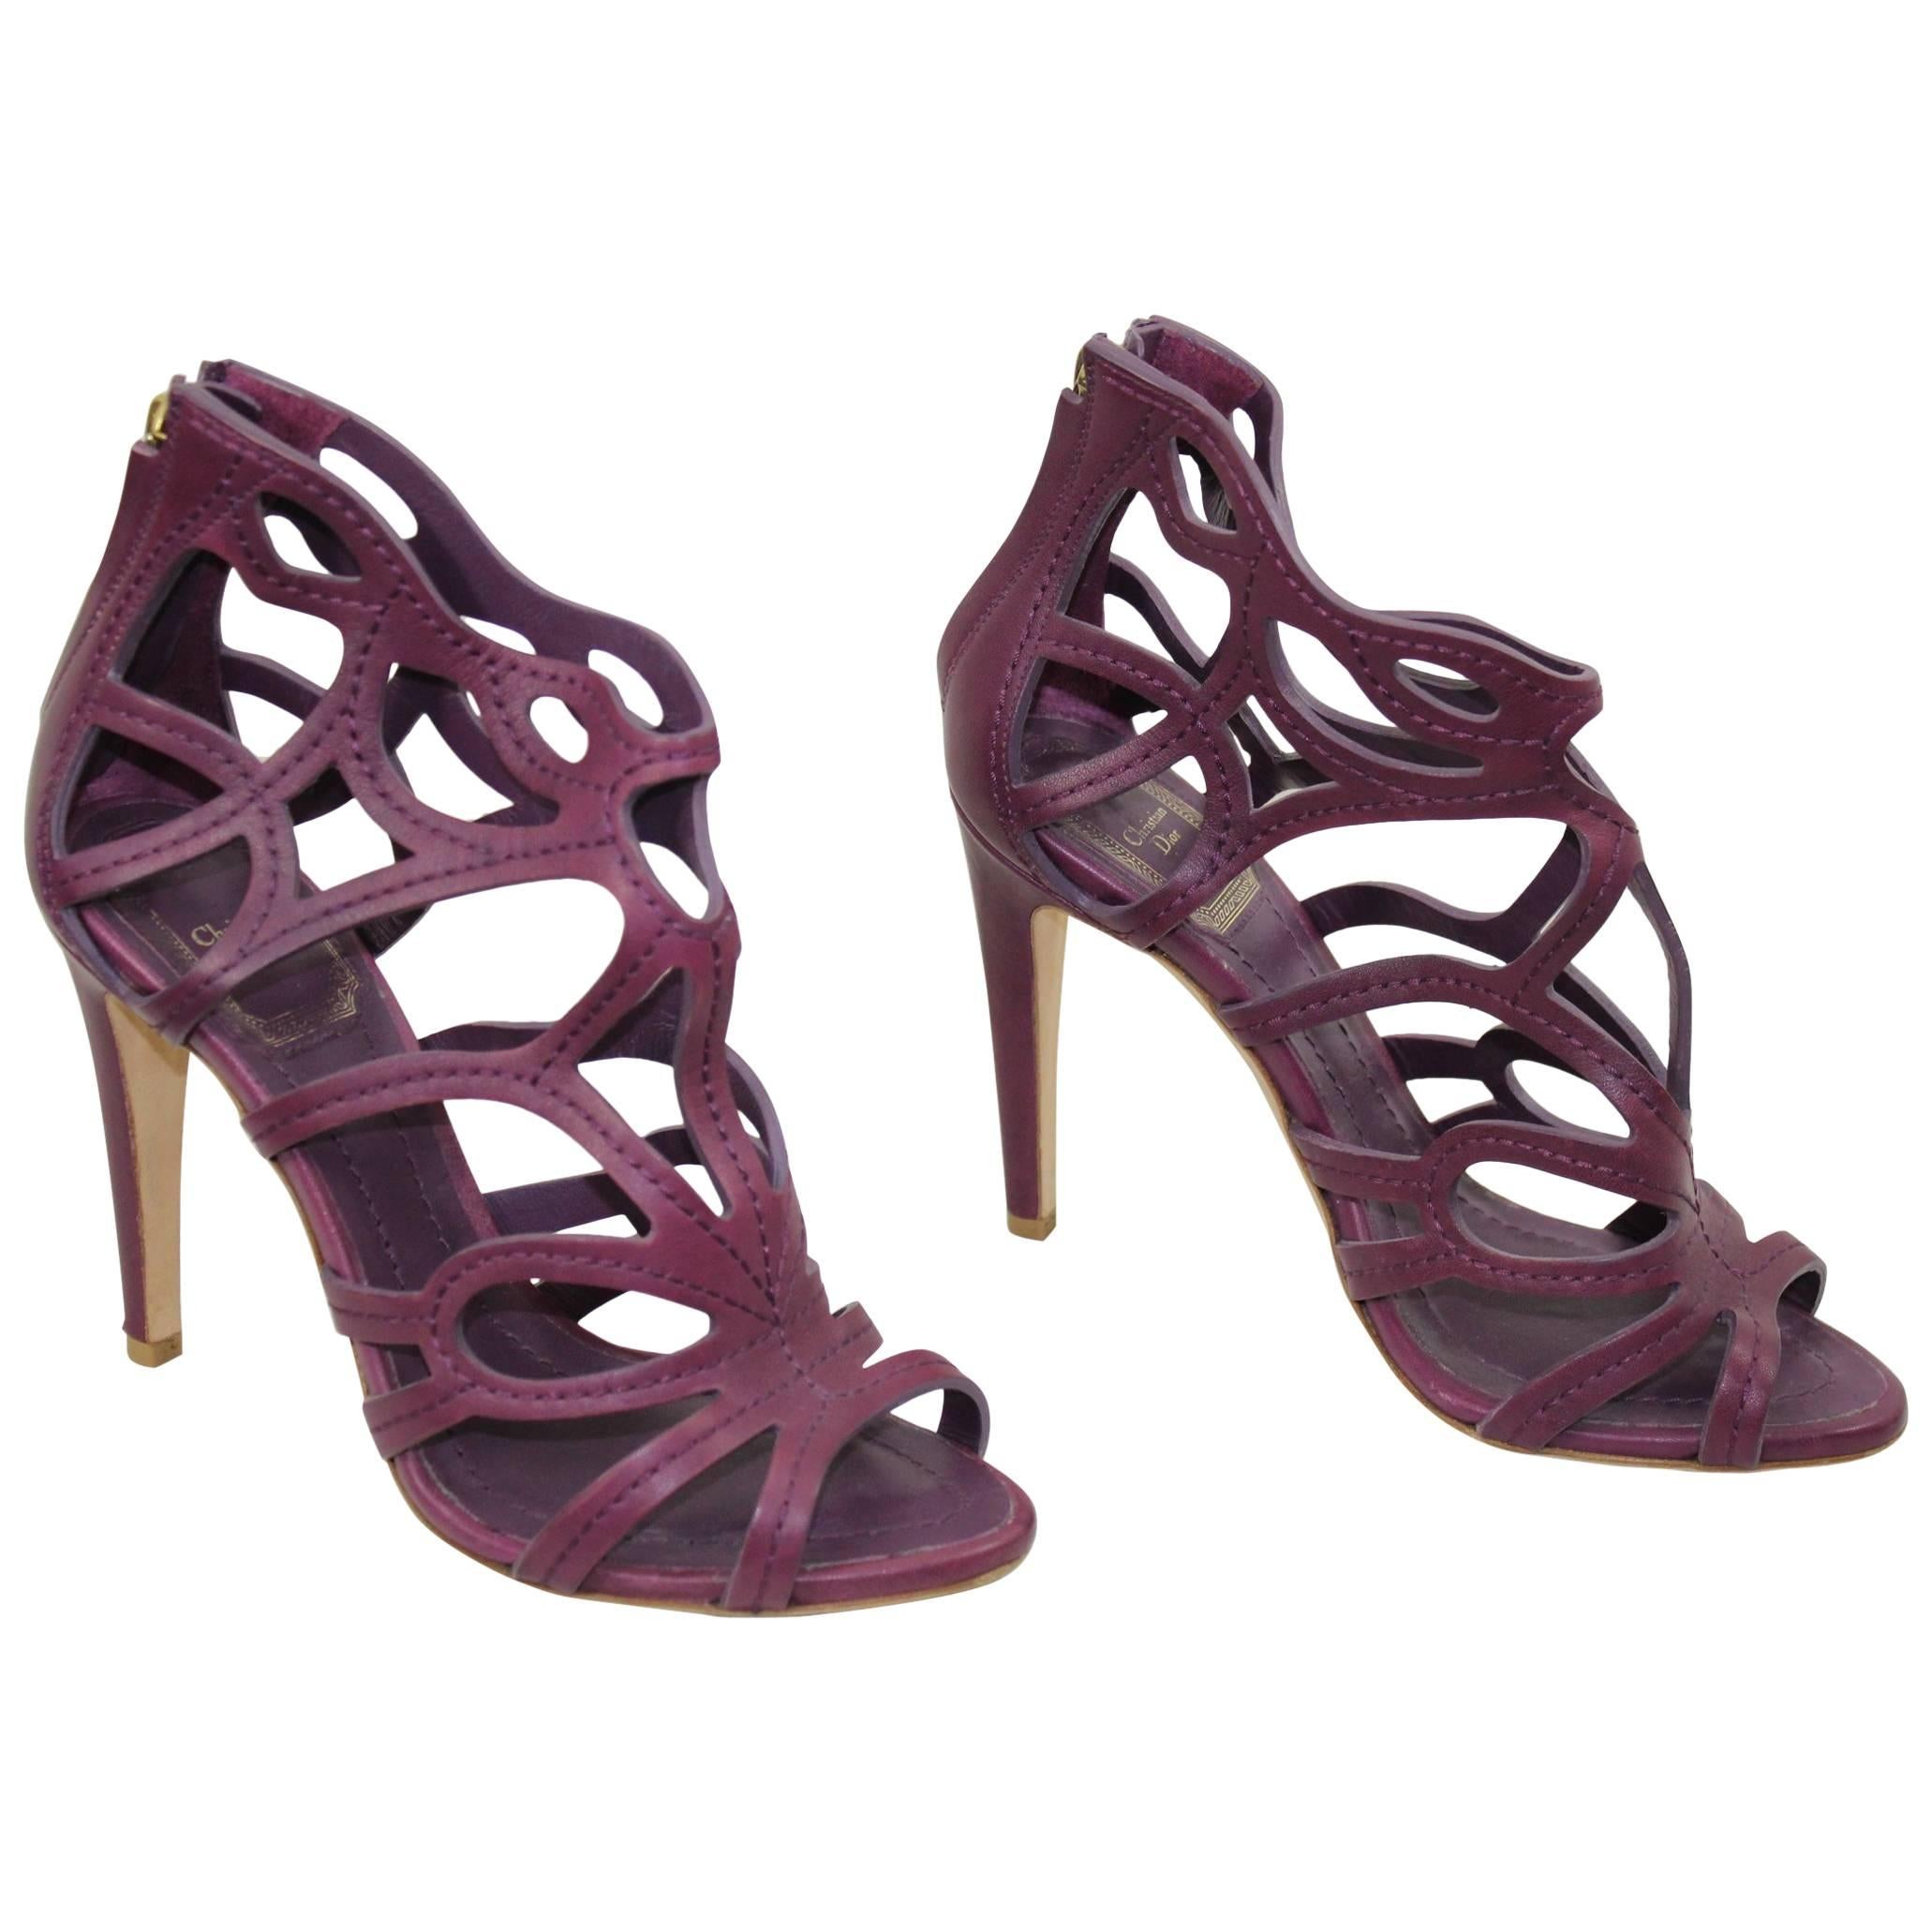 Dior amazing Leather High heel Sandals. Size US 4.5 (FR 35.5)